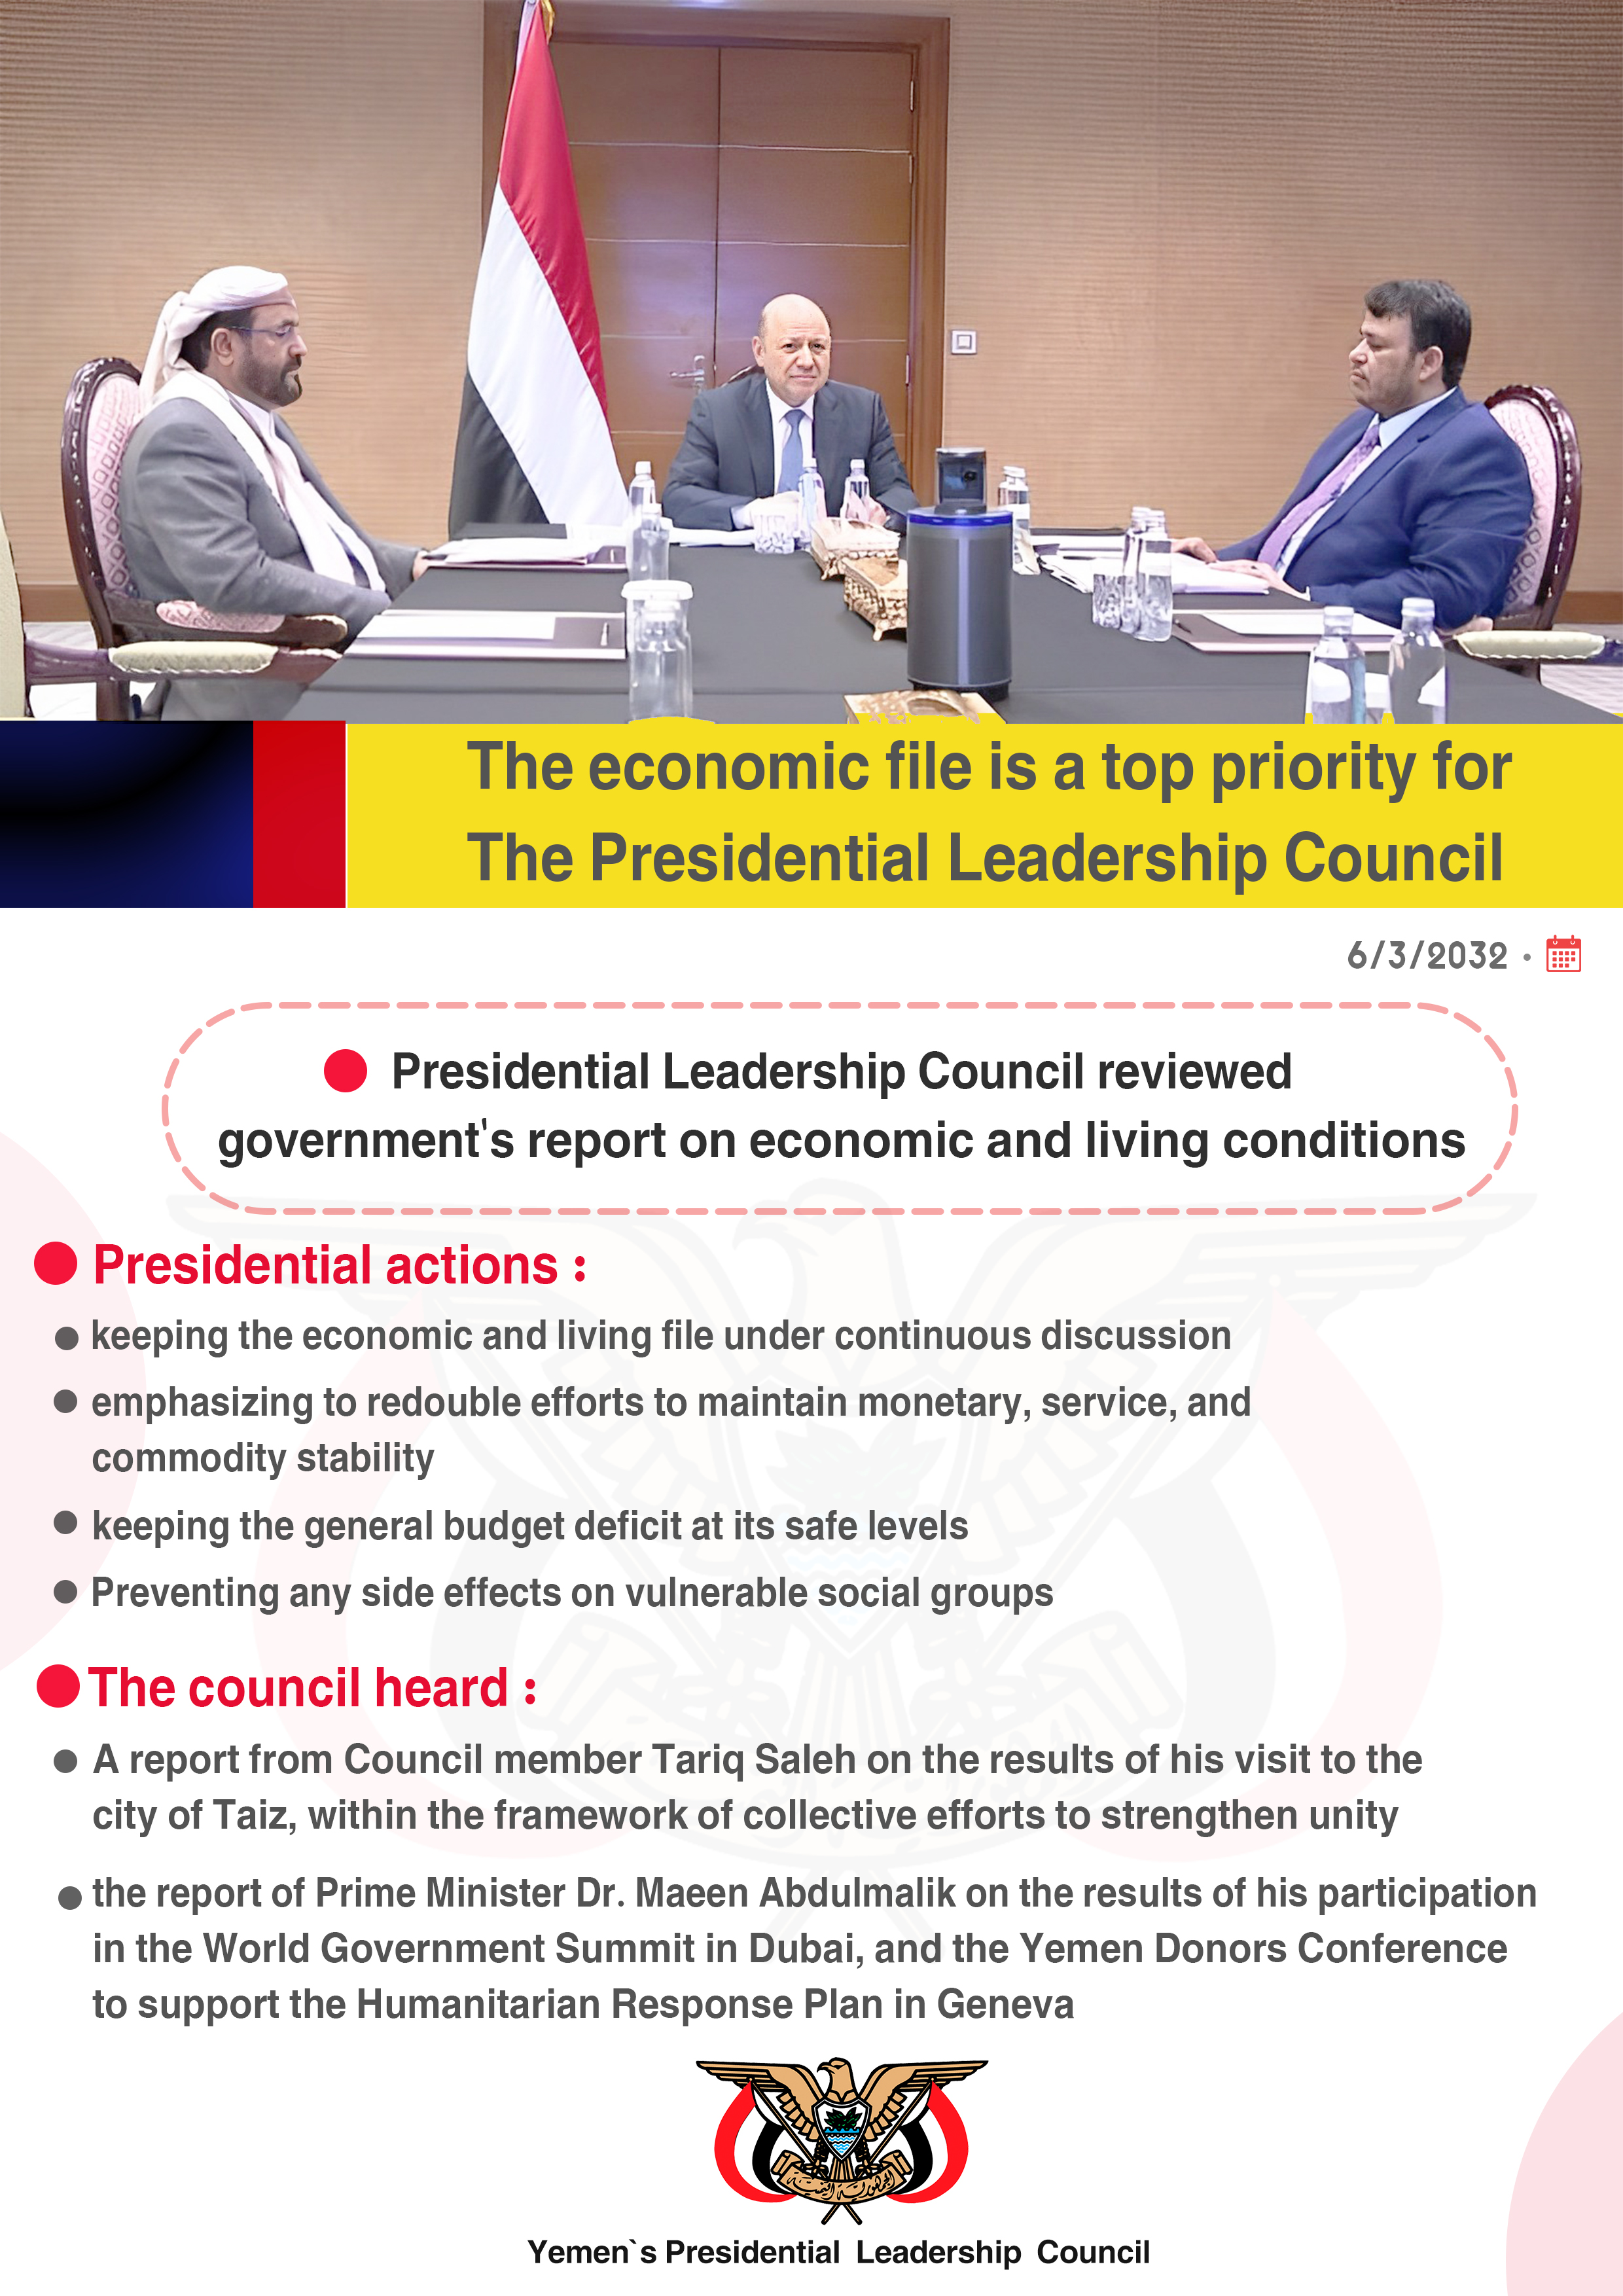 the Presidential Leadership Council reviewed the government's report on the economic and living conditions